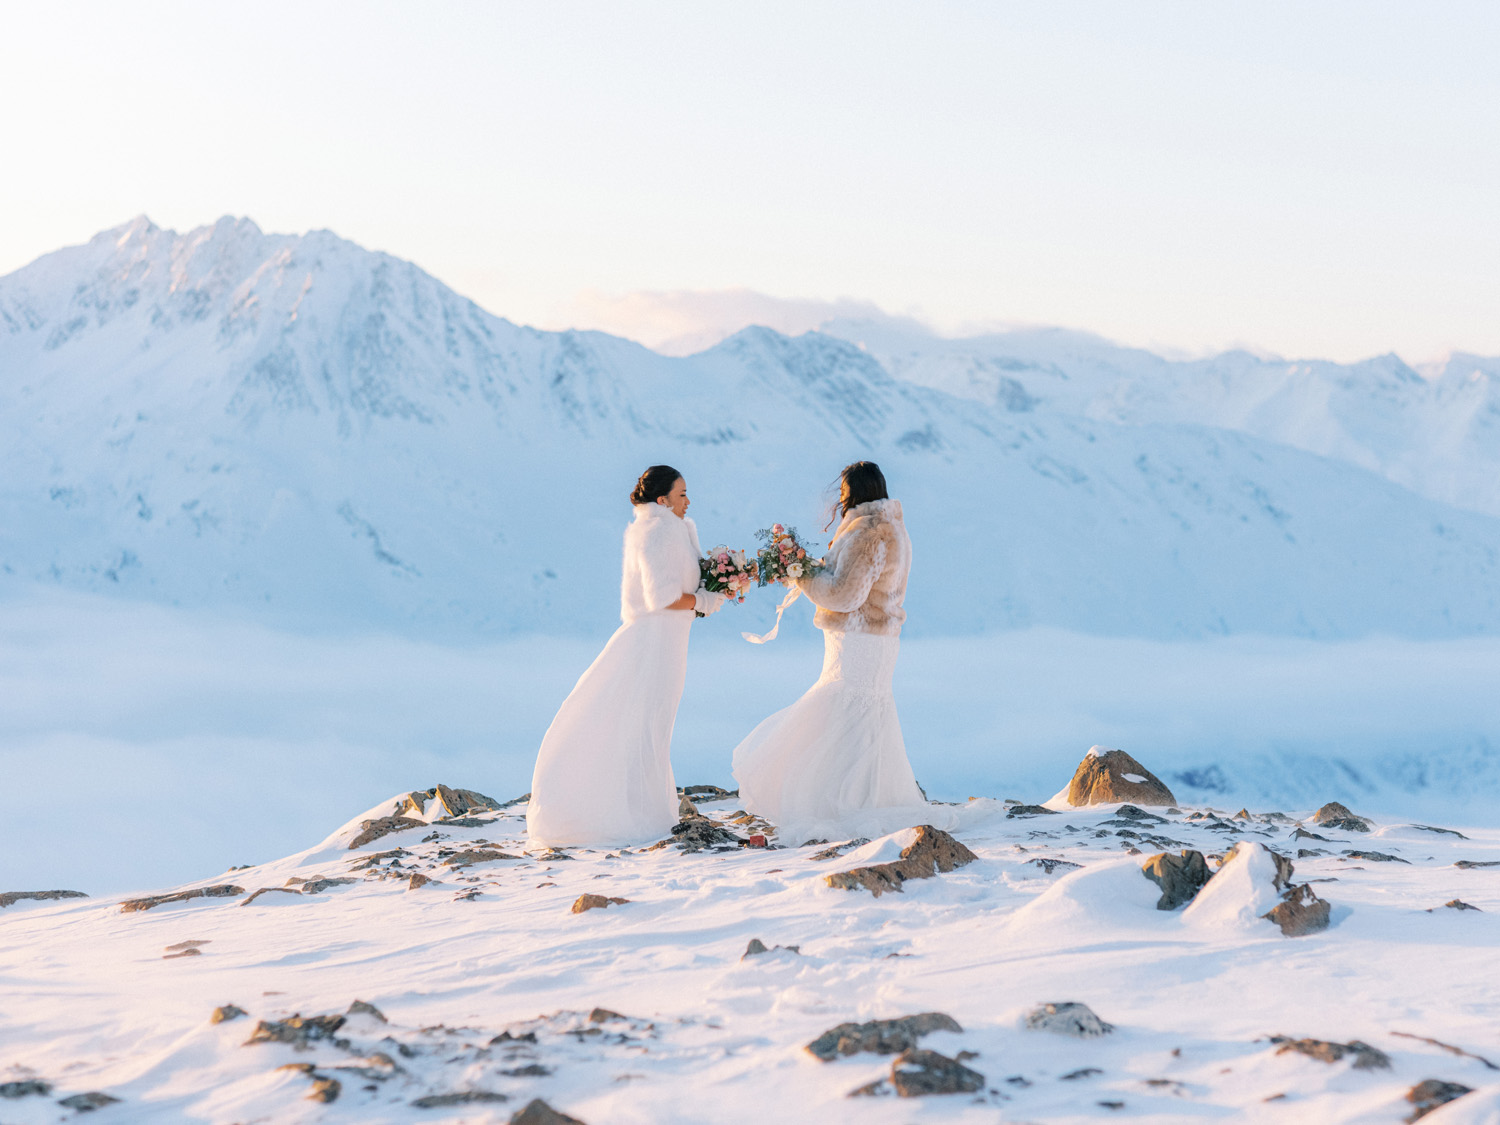 Alaska elopements, two brides on a snowy mountaintop looking at each other, bridal bouquet in hand, wearing faux fur coats